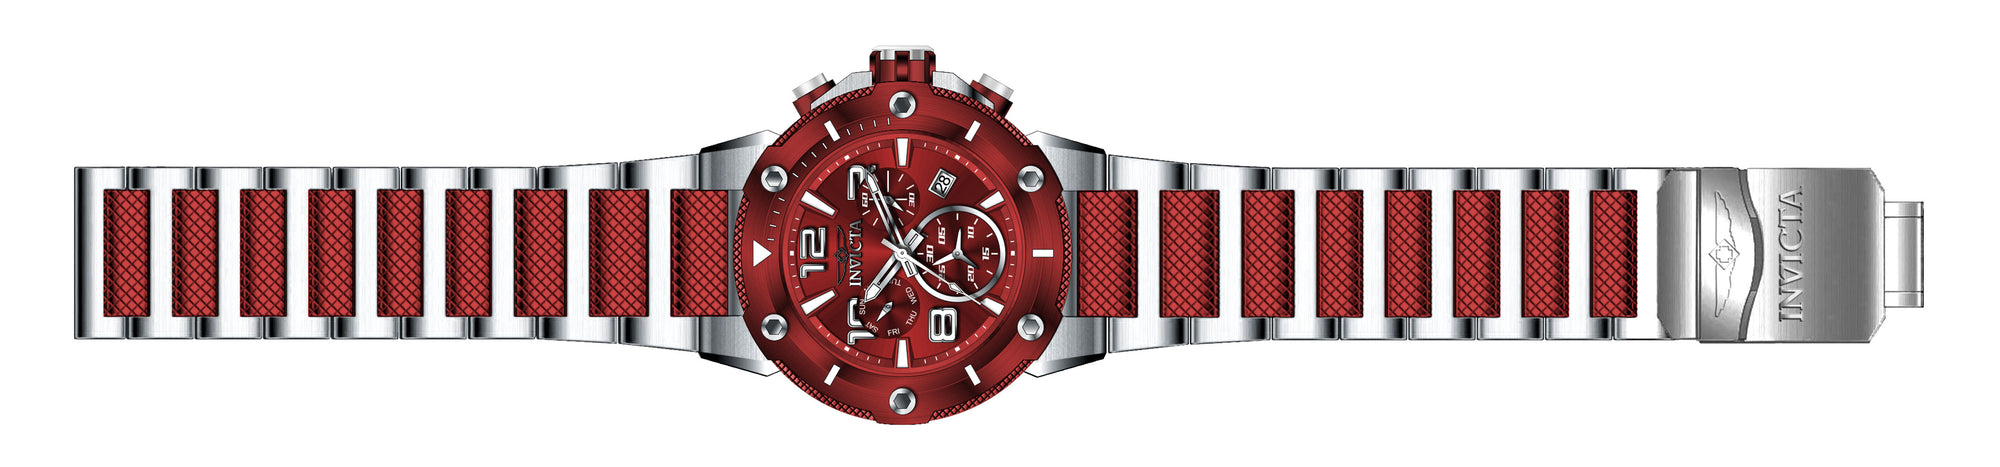 Band for Invicta Speedway Men 40626